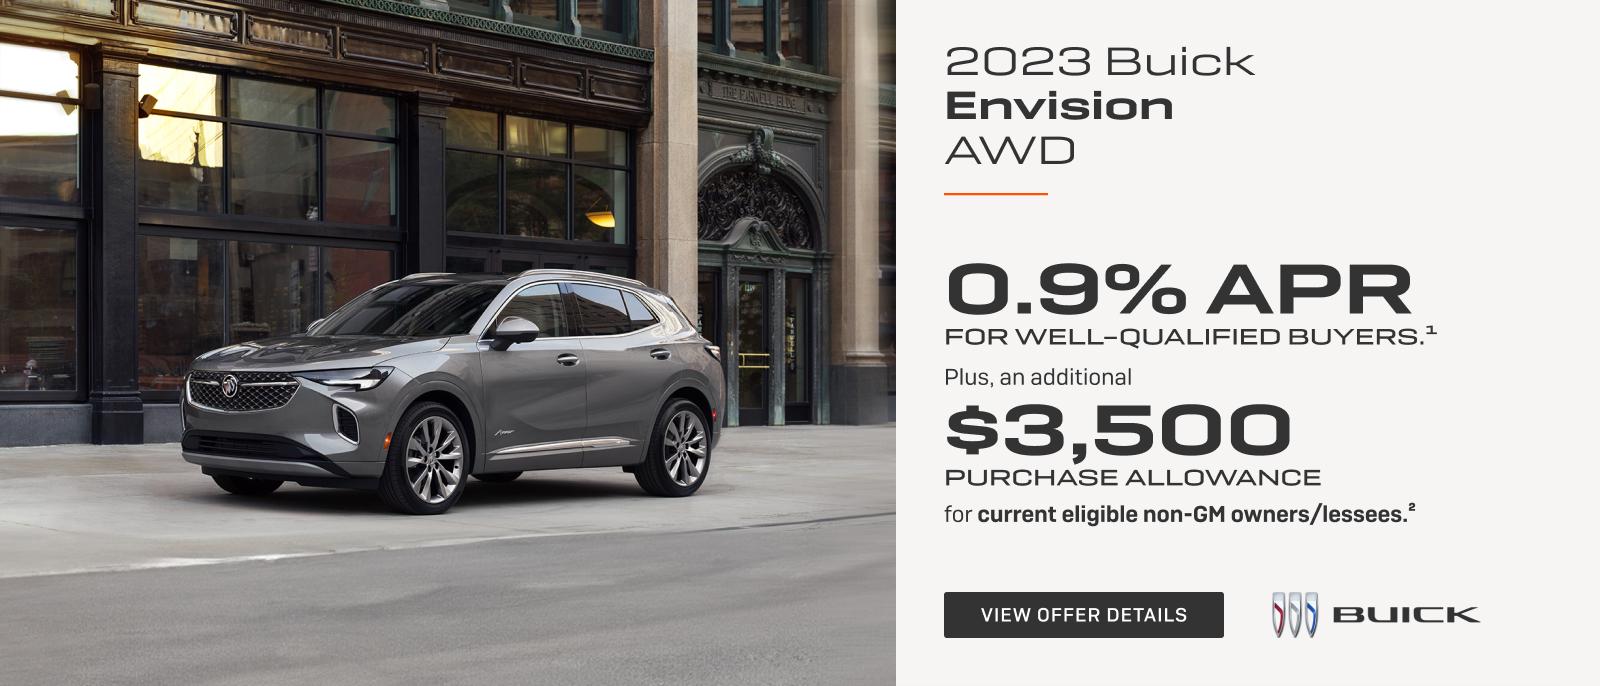 0.9% APR 
FOR WELL-QUALIFIED BUYERS.1

Plus, an additional $3,500 PURCHASE ALLOWANCE for current eligible non-GM owners/lessees.2